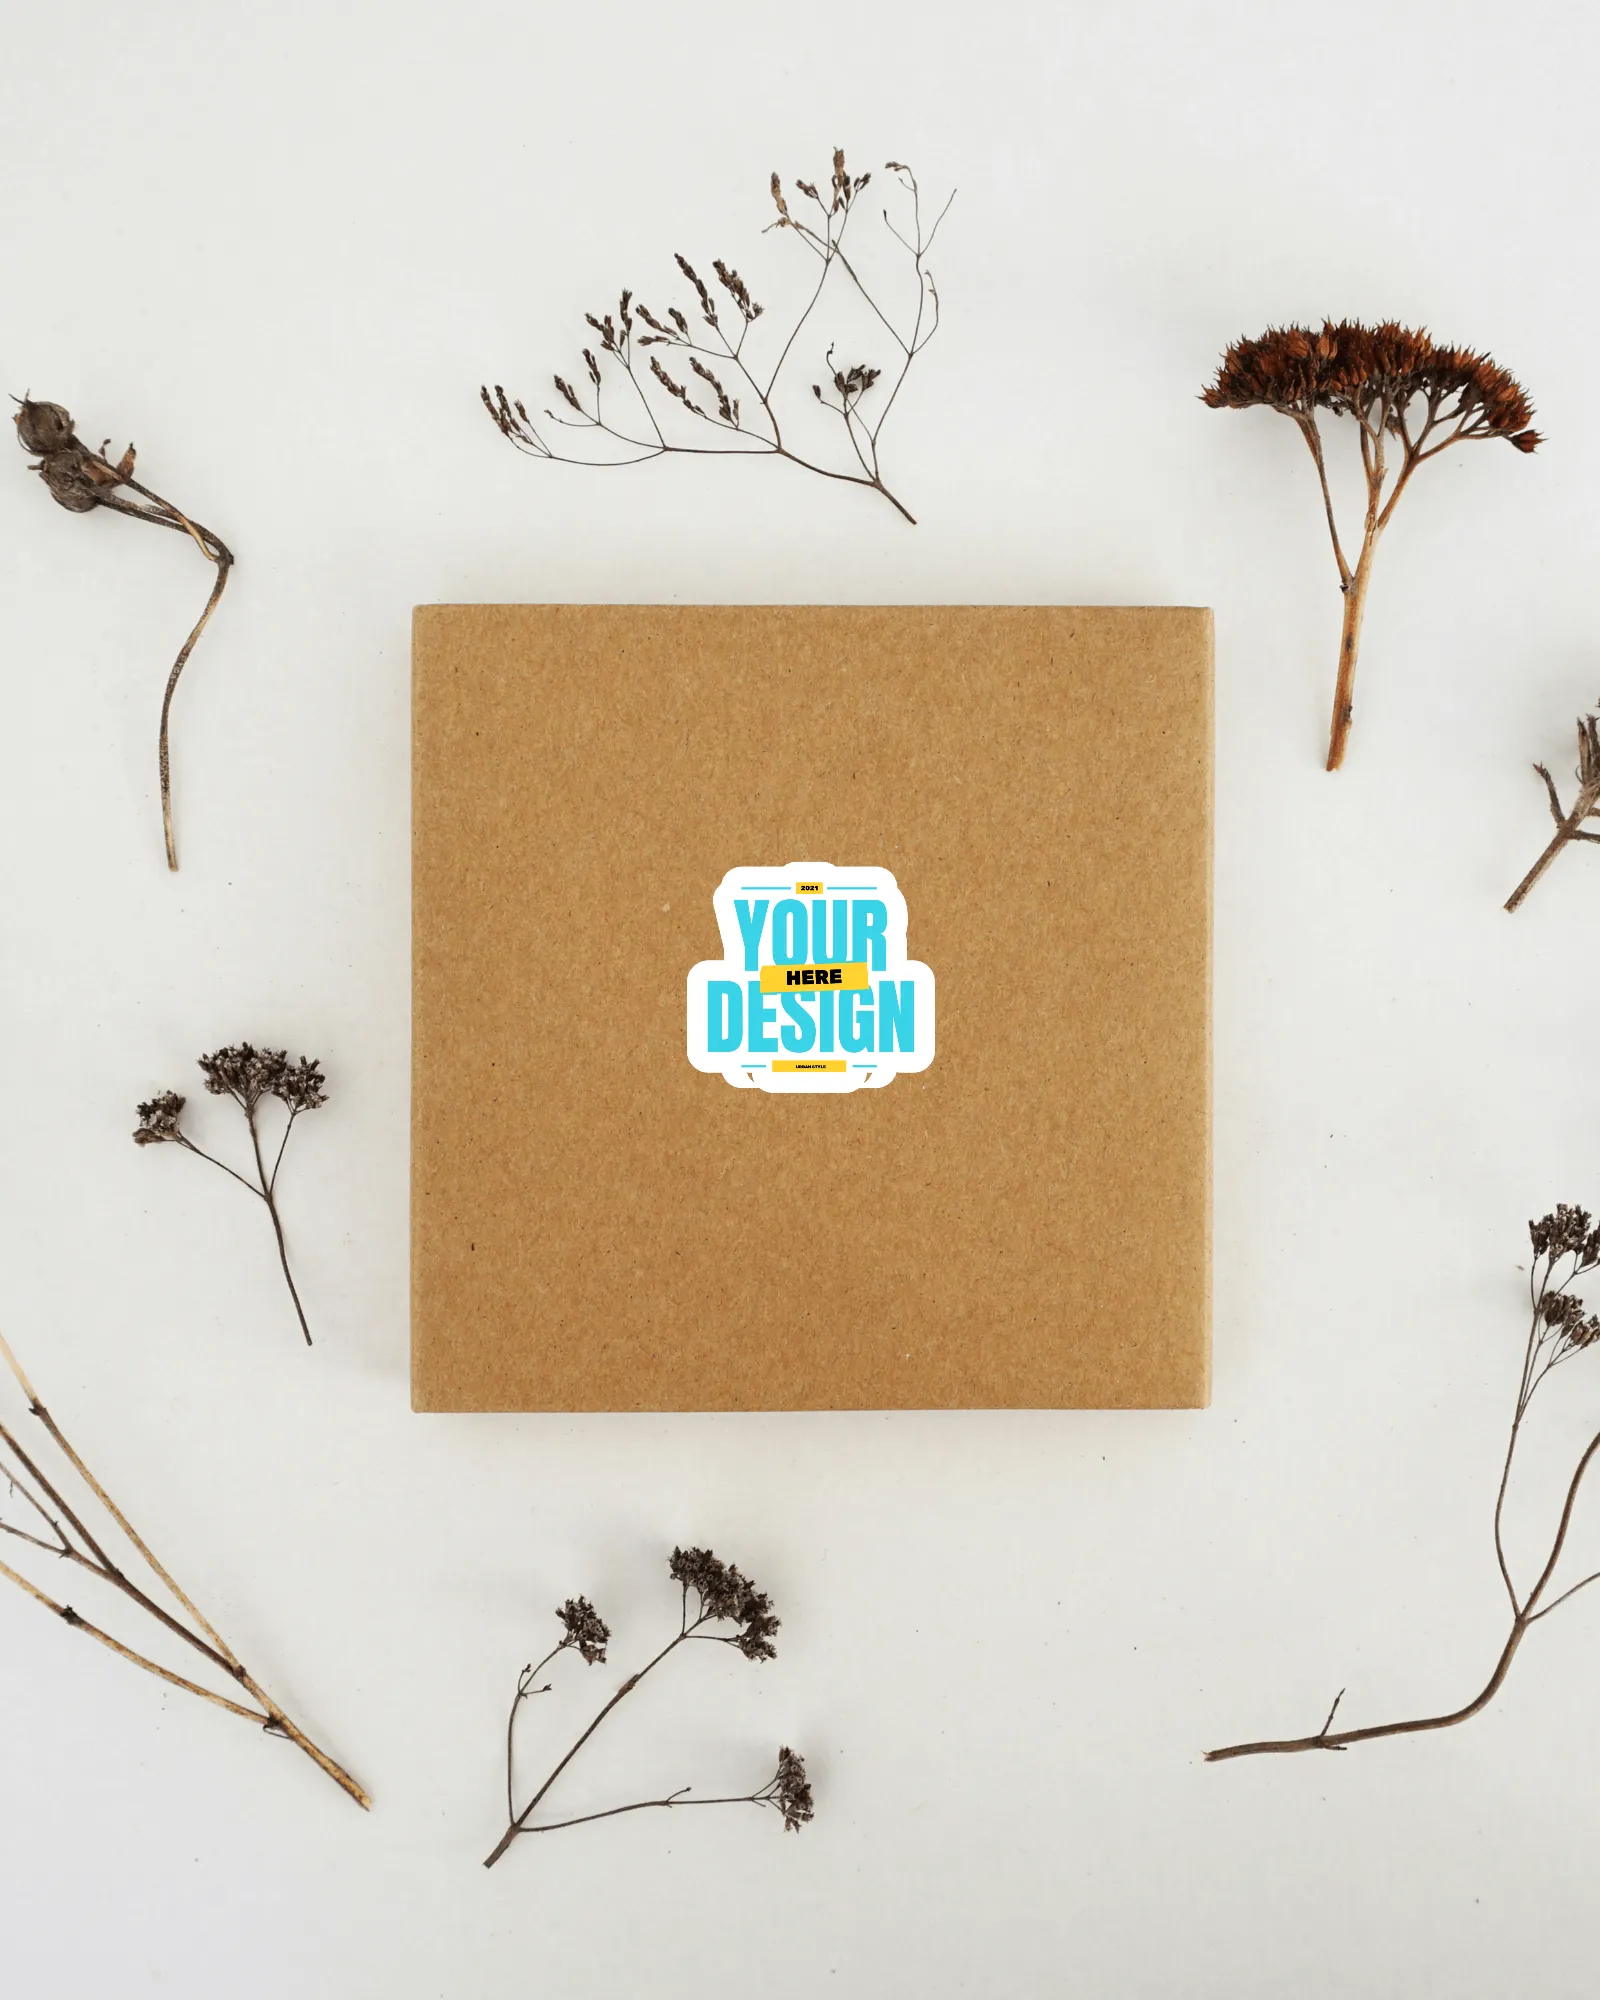 sticker mockup on a corrugated box with leaves in background